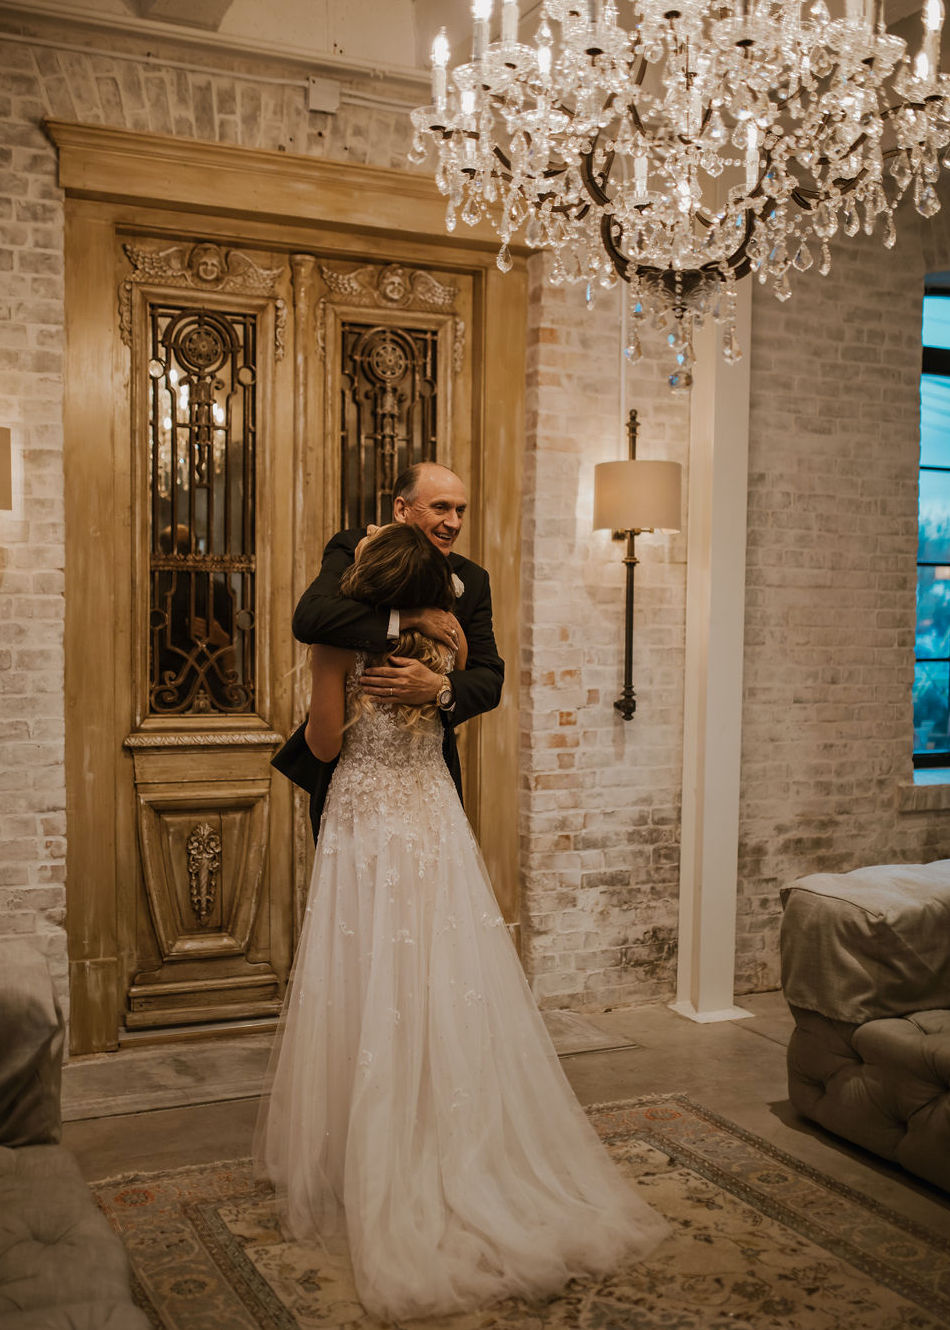 The bride hugs her dad in the bridal suite before she celebrates her love story at The Astorian in Houston, TX.